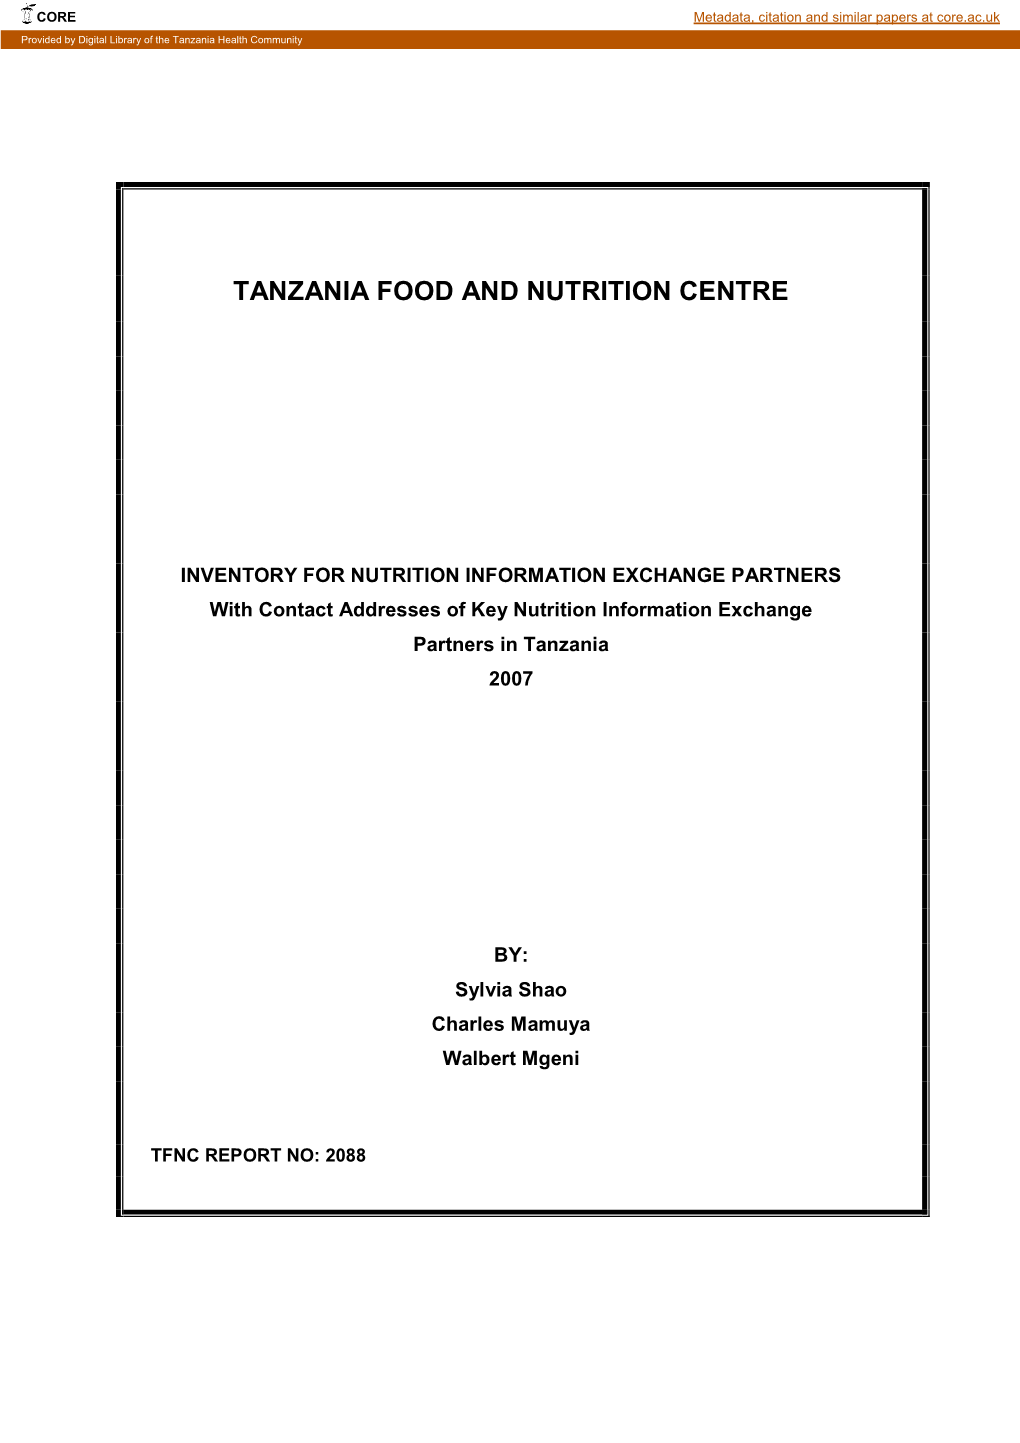 Tanzania Food and Nutrition Centre